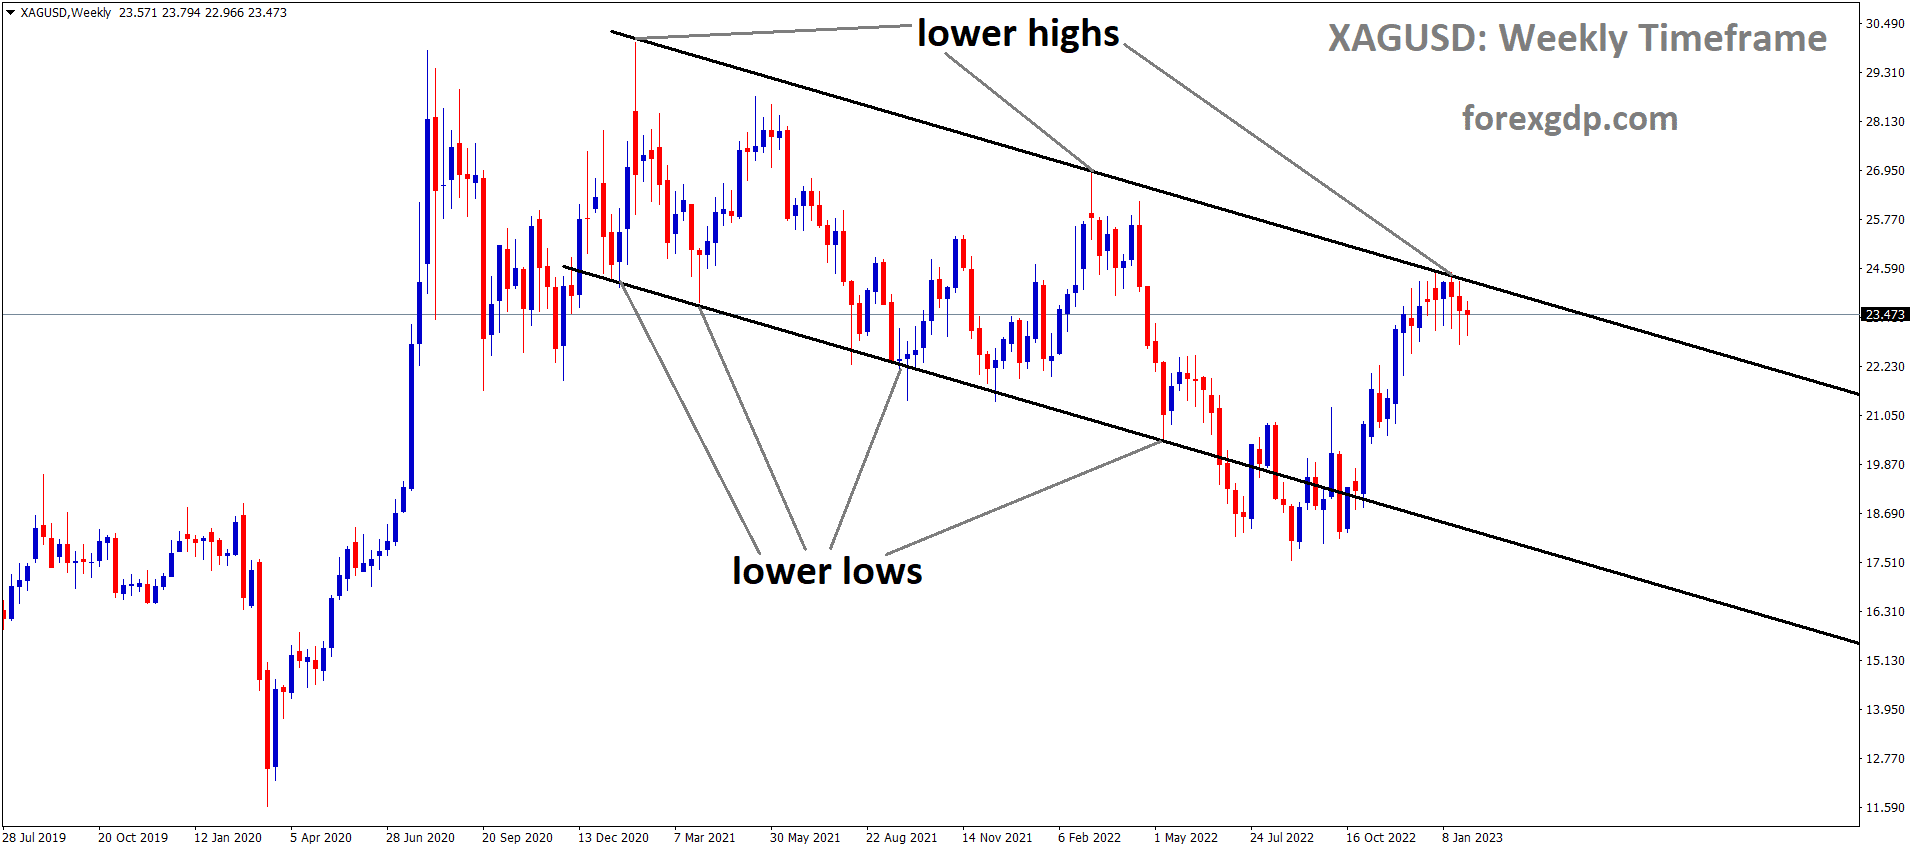 XAGUSD Silver price is moving in the Descending channel and the market has reached the lower high area of the channel